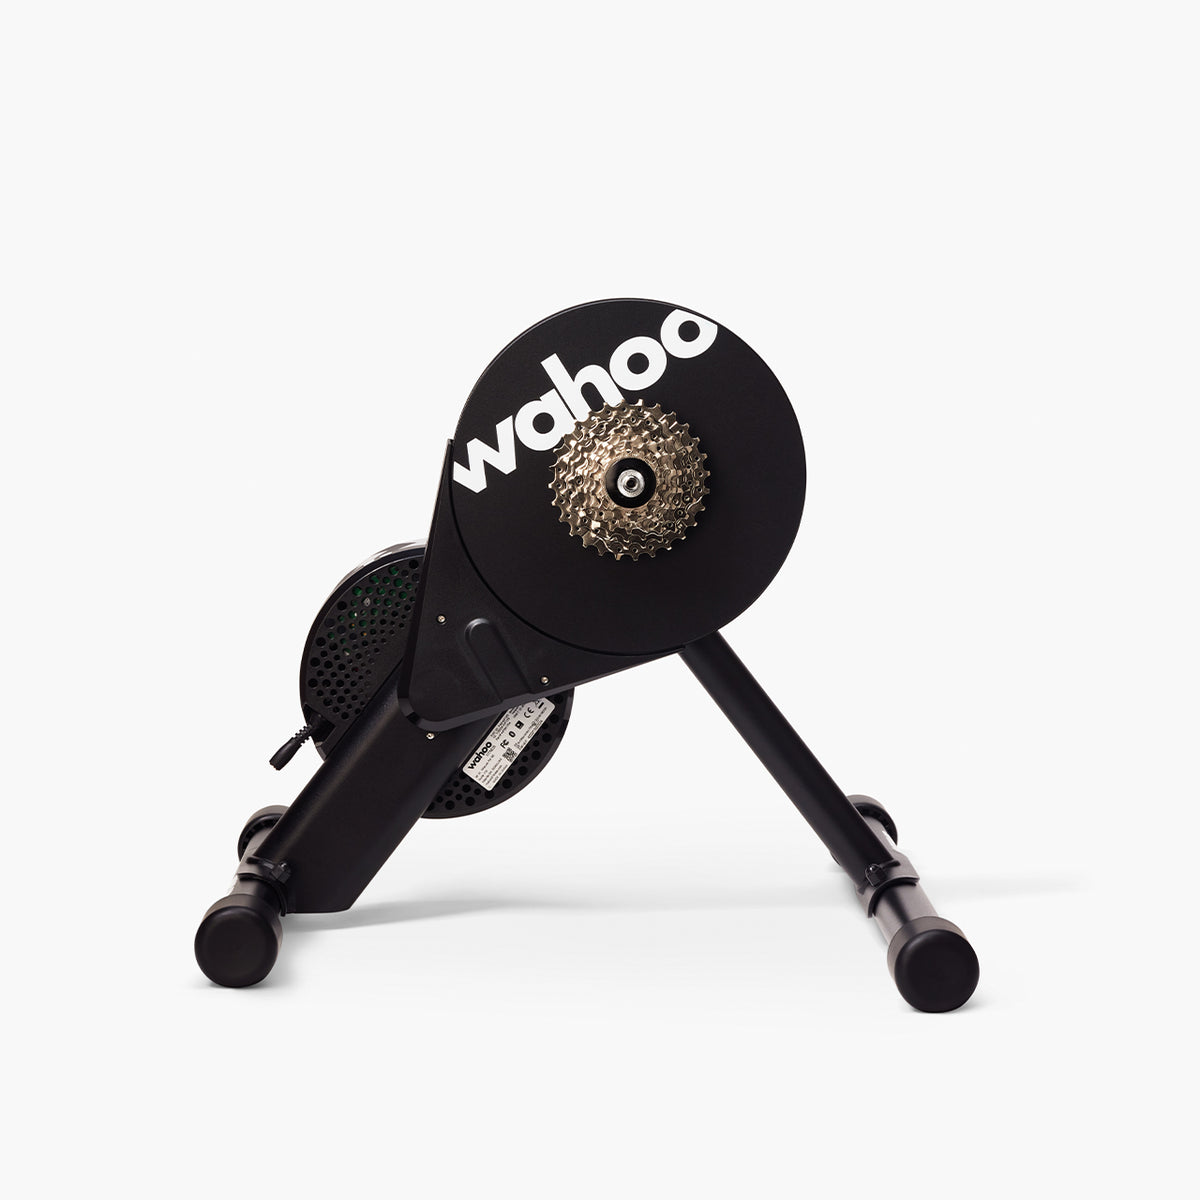 Wahoo KICKR CORE smart trainer with 8-speed cassette